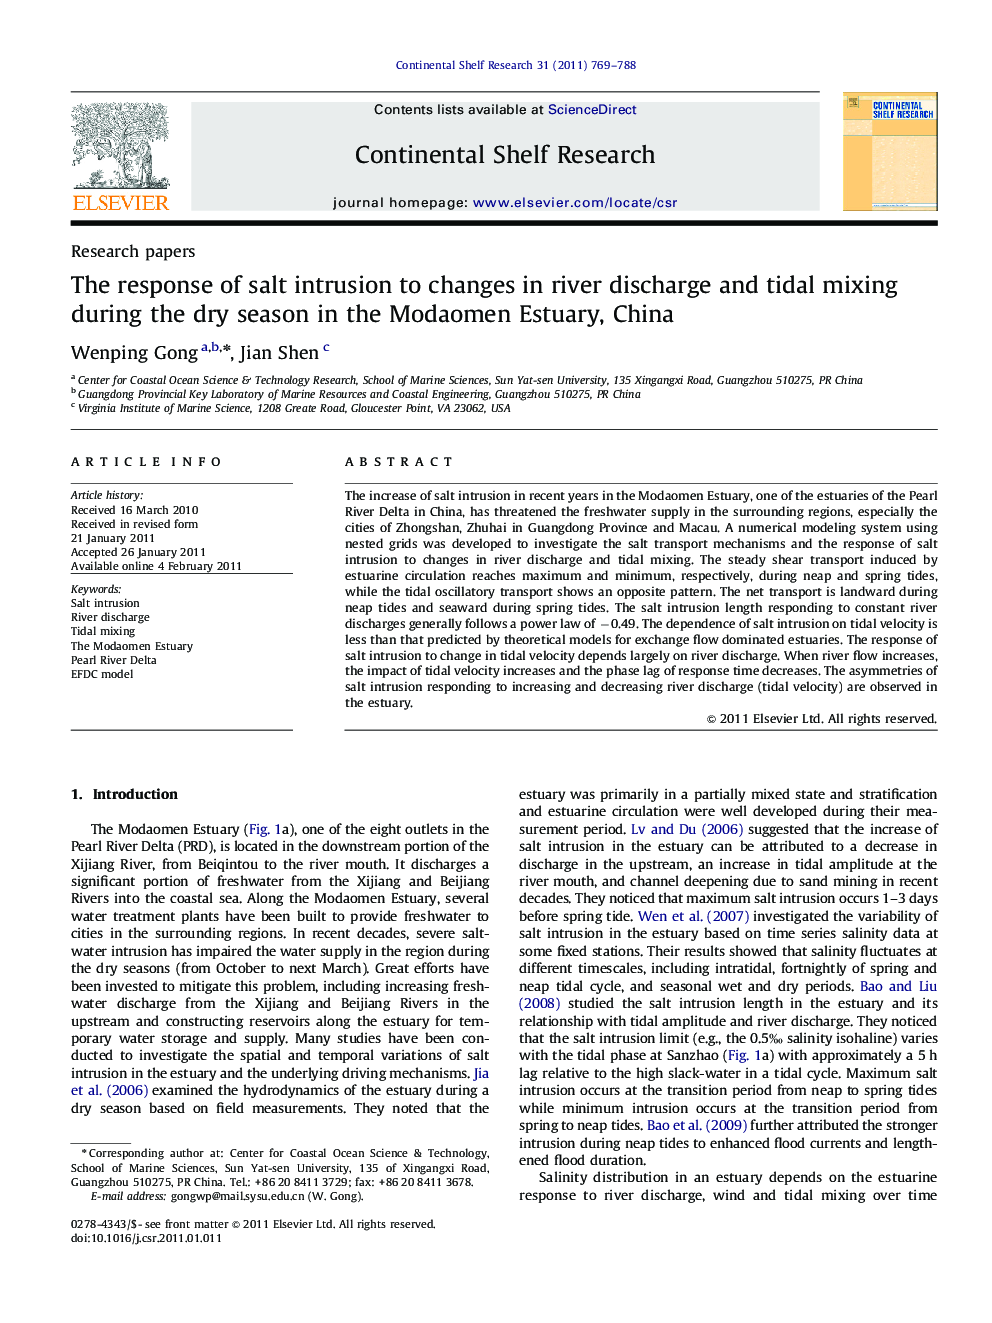 The response of salt intrusion to changes in river discharge and tidal mixing during the dry season in the Modaomen Estuary, China